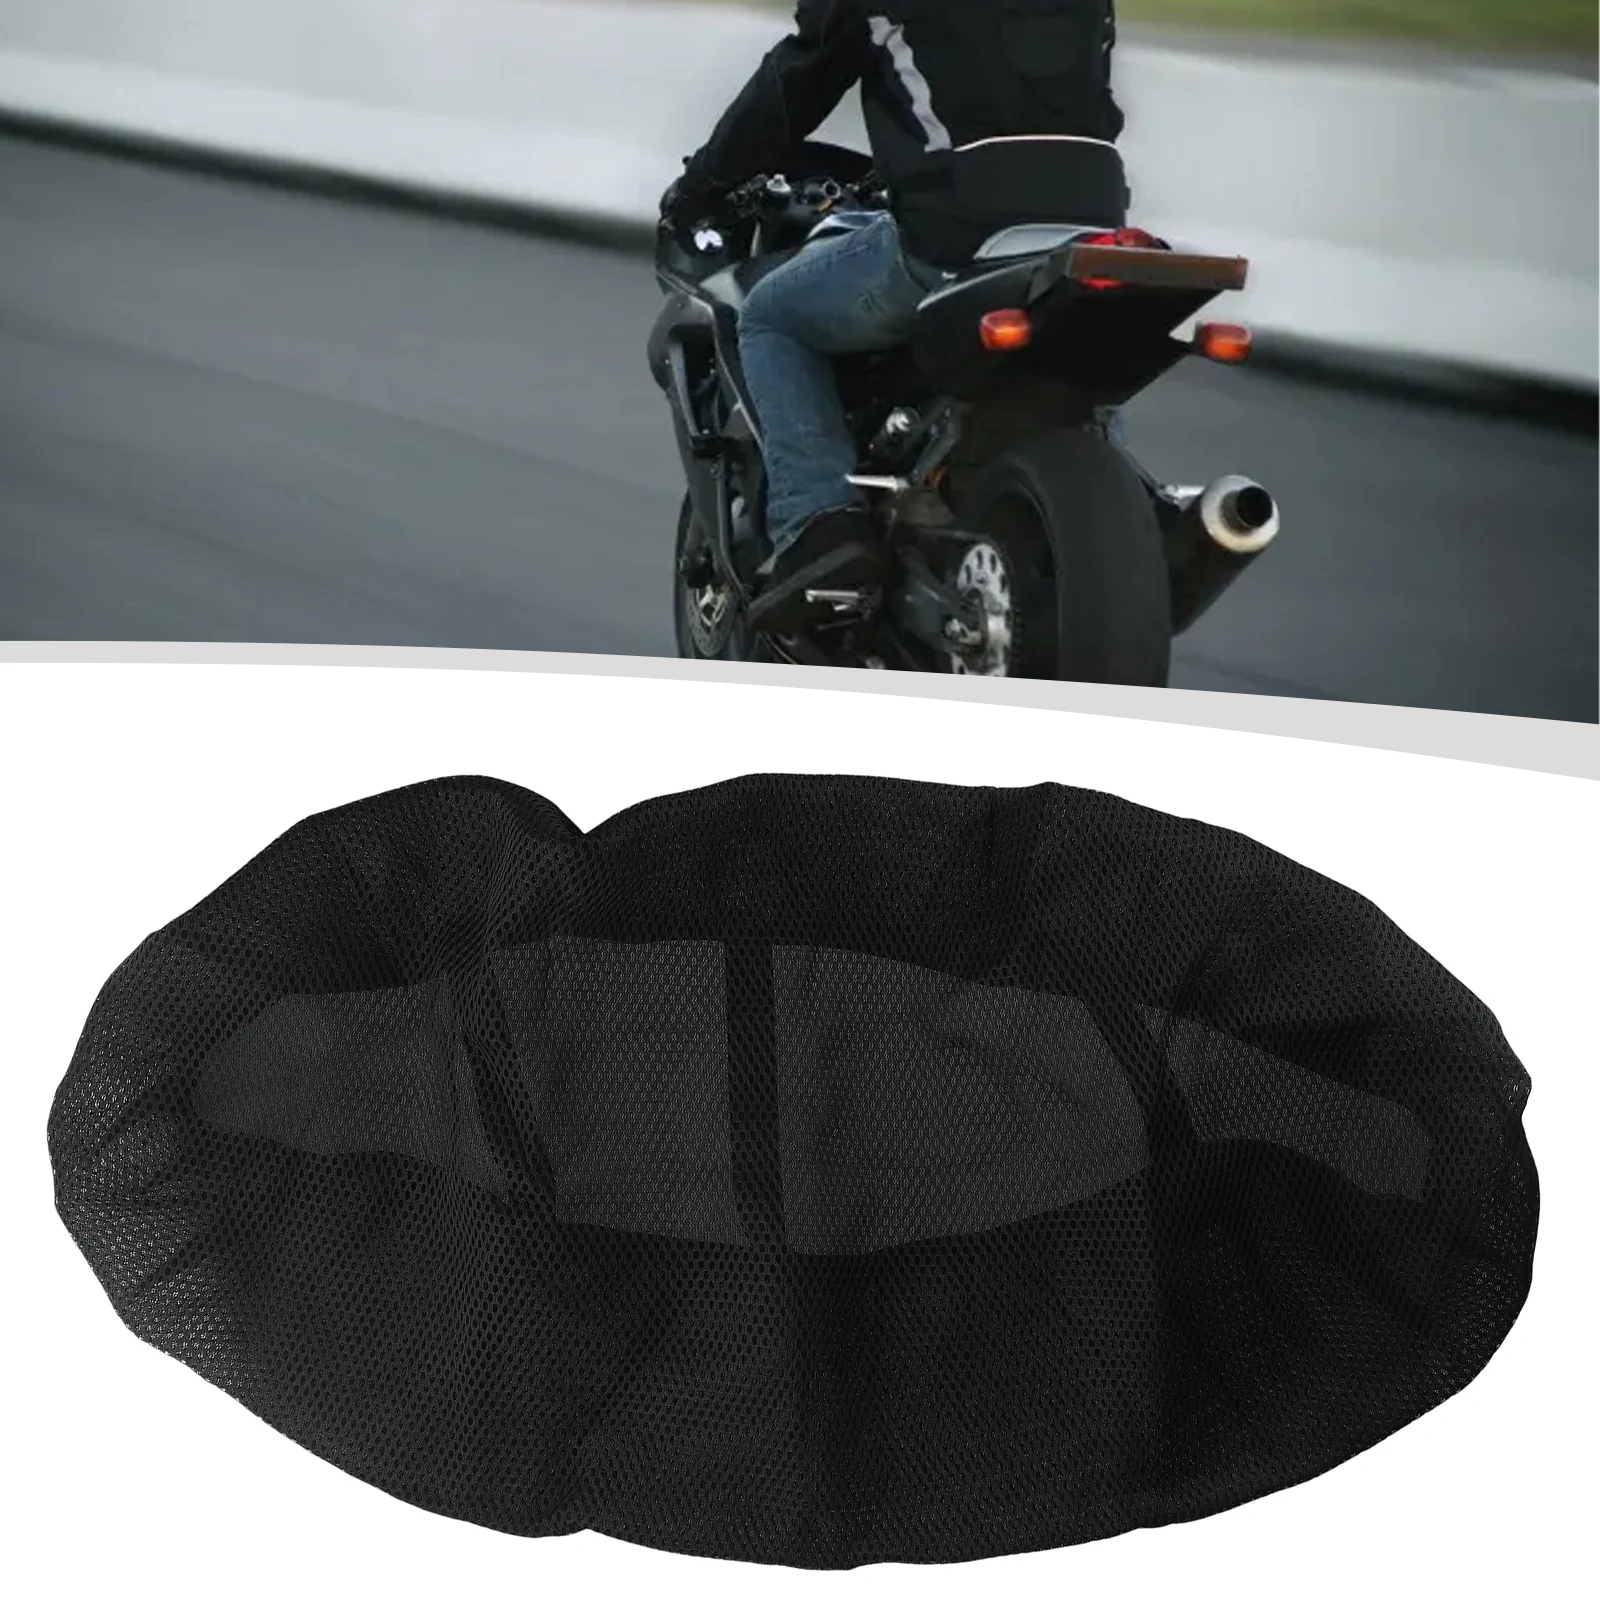 Motorcycle Cushion Seat Cover Motorcycle Mildew-proof Moisture-proof Motorcycle Pad 85*60CM Anti-Slip Brand New motorcycle cushion seat cover motorcycle mildew proof moisture proof motorcycle pad 85 60cm anti slip brand new